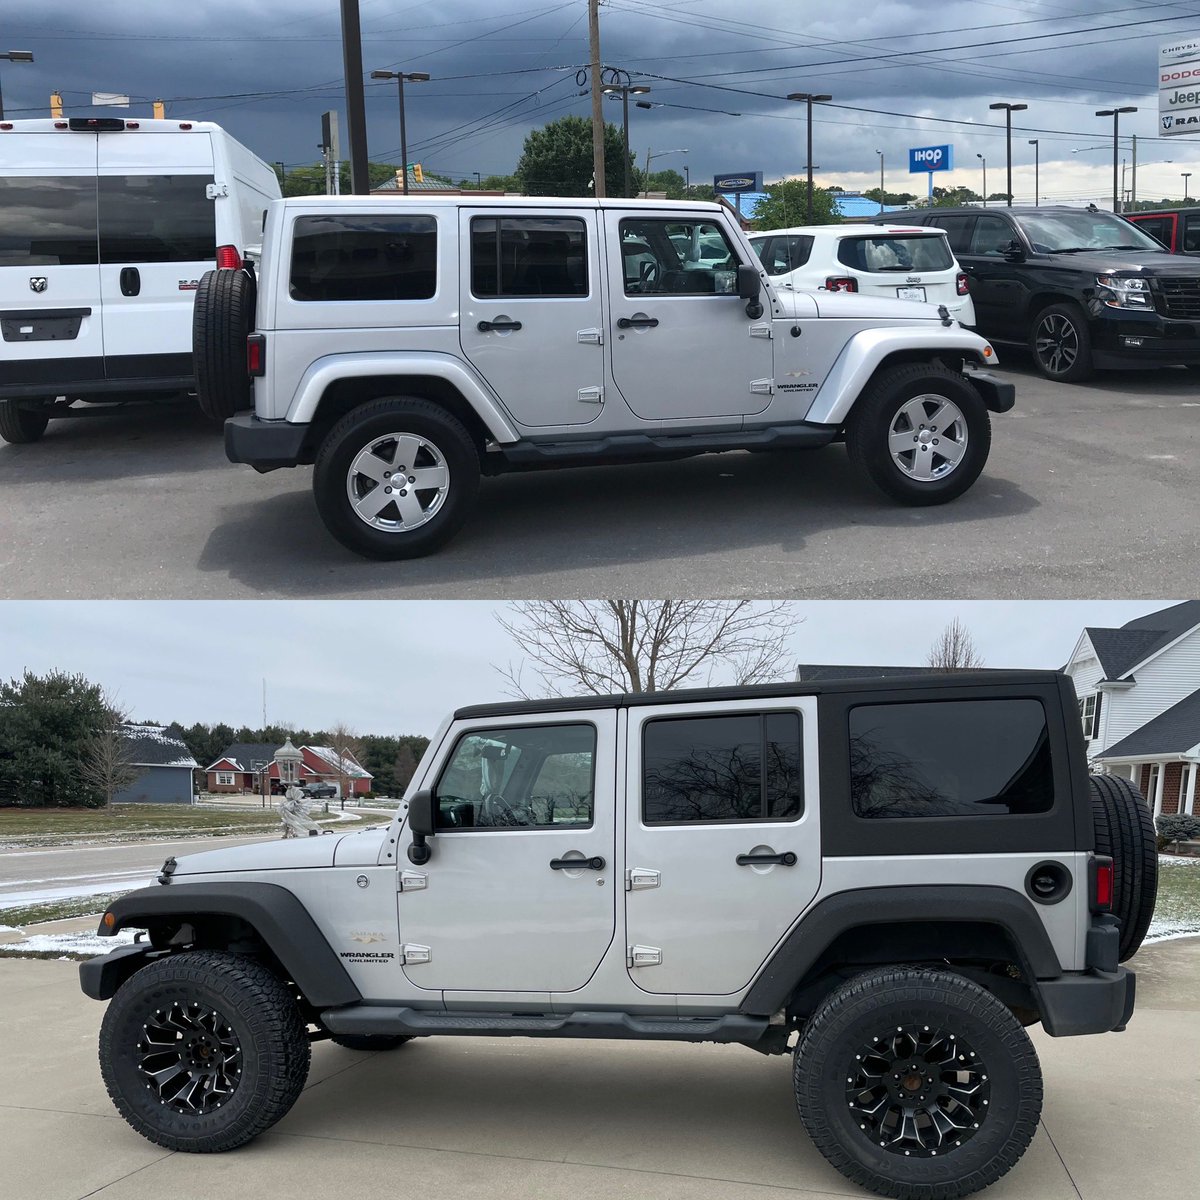 It took a few months but #Memphis is #trailready #beforeandafter #trailsandtails #Kodyapproved #jeep #jeepon #letsgo